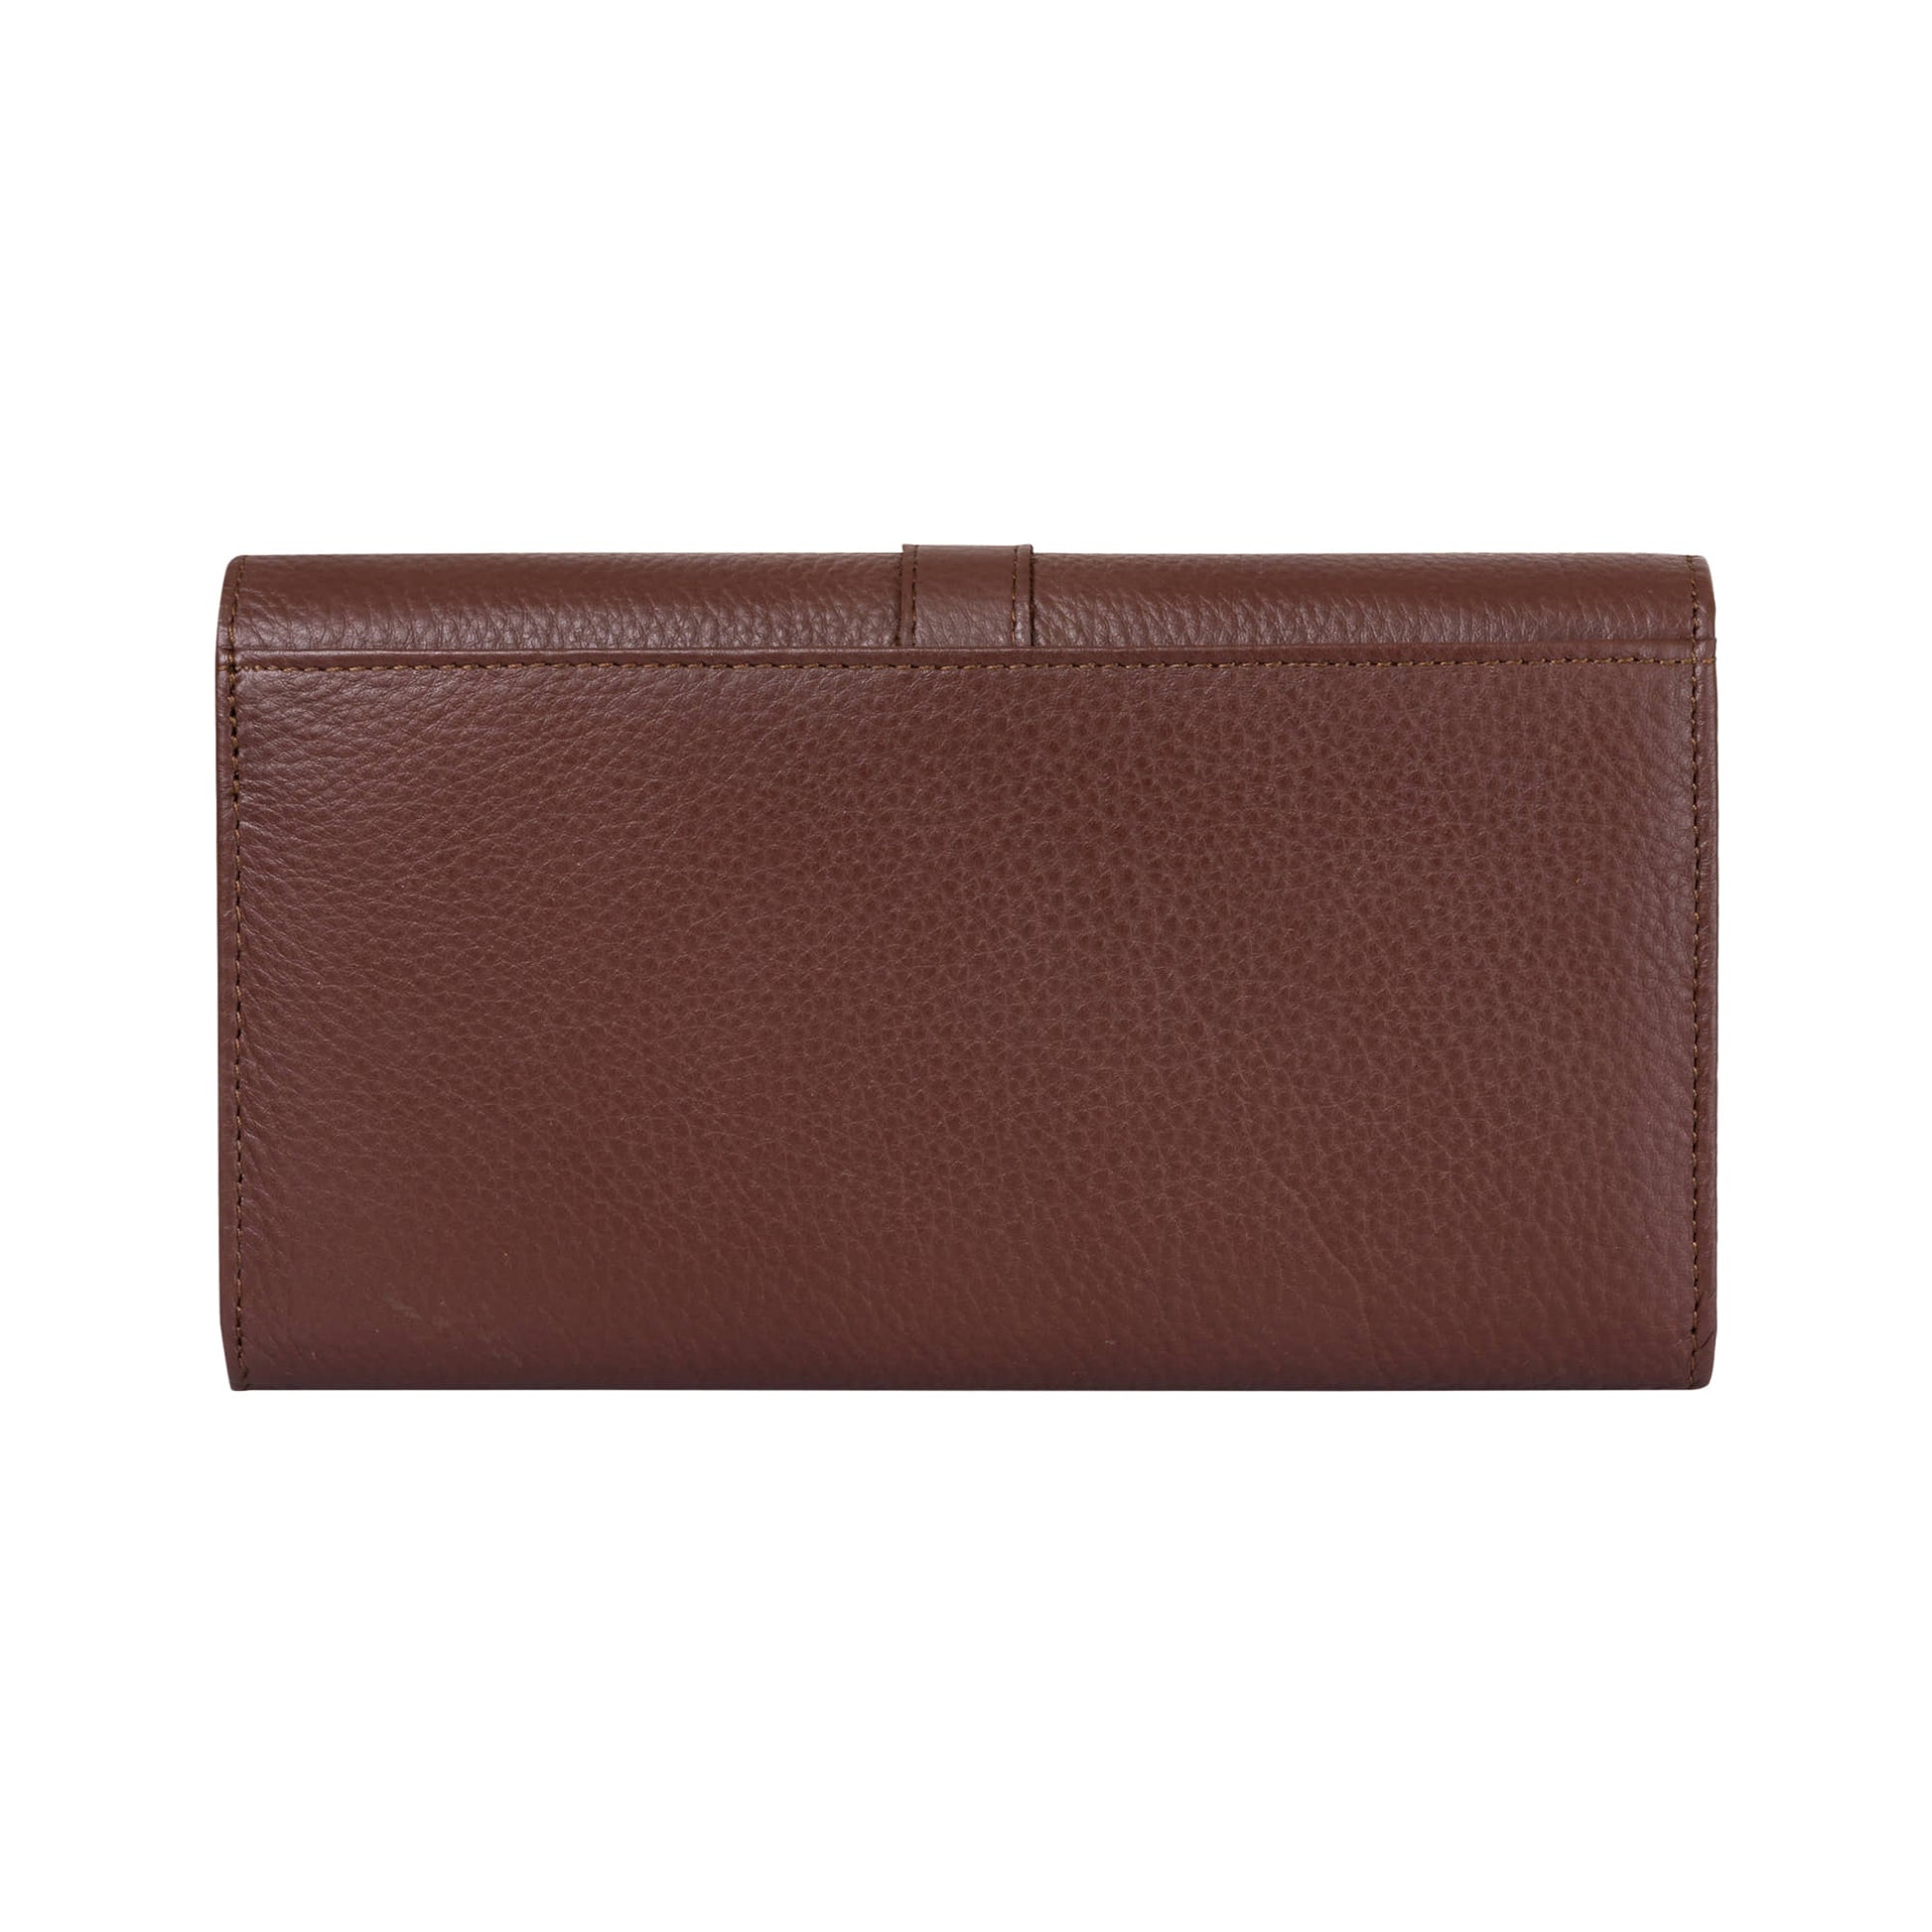 Style n Craft 391105 Double Fold Ladies Long Clutch Wallet in High Grade Brown Full Grain Leather - Back View 